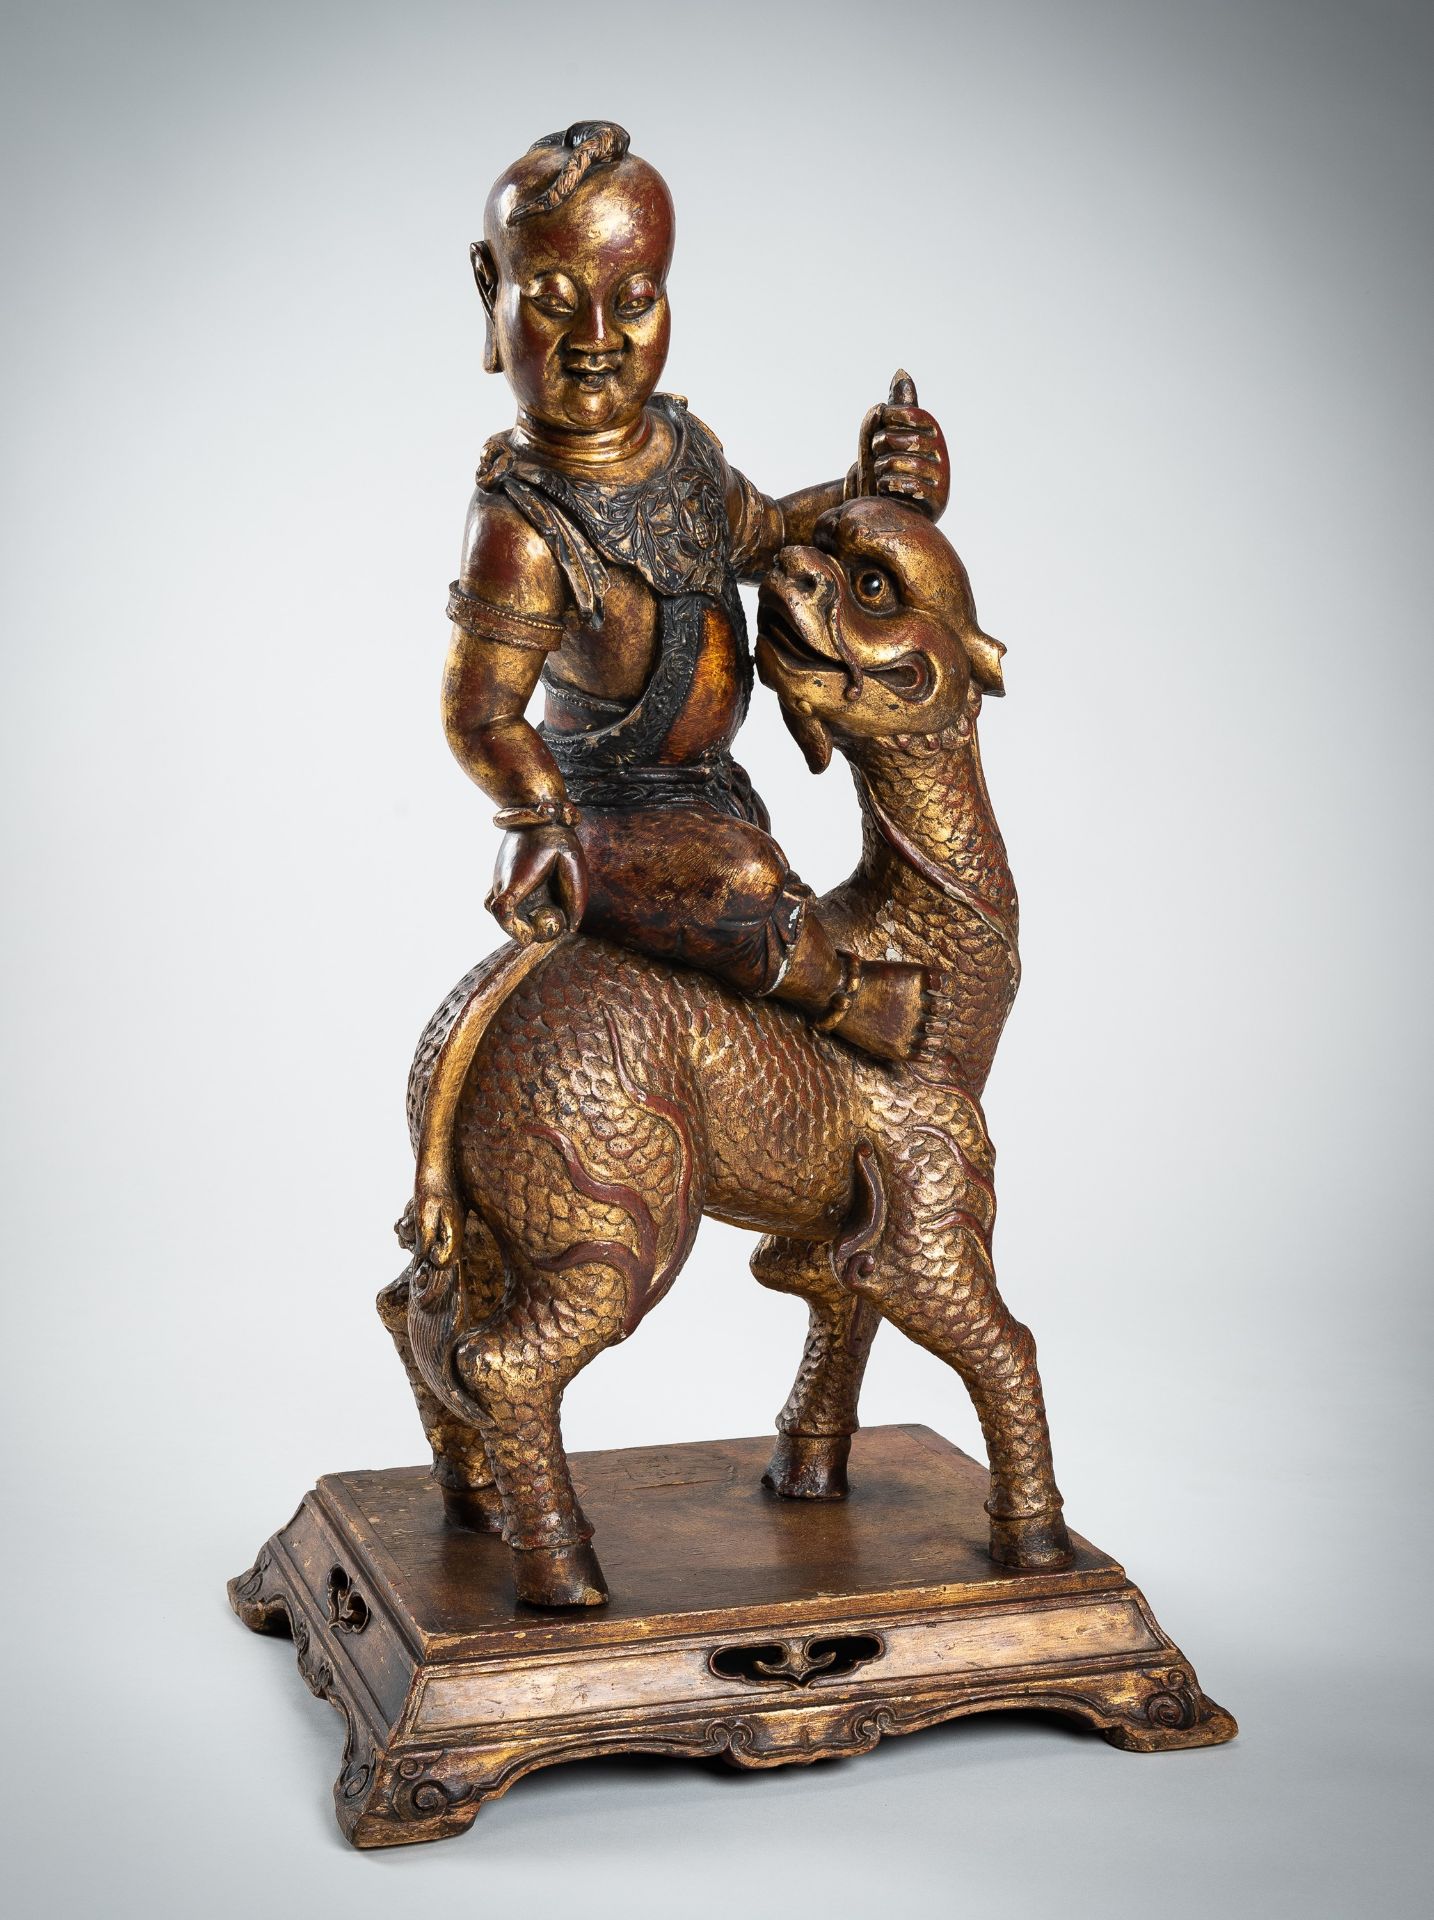 A VERY LARGE GILT-LACQUERED WOOD STATUE OF YOUNG BUDDHA RIDING QILIN